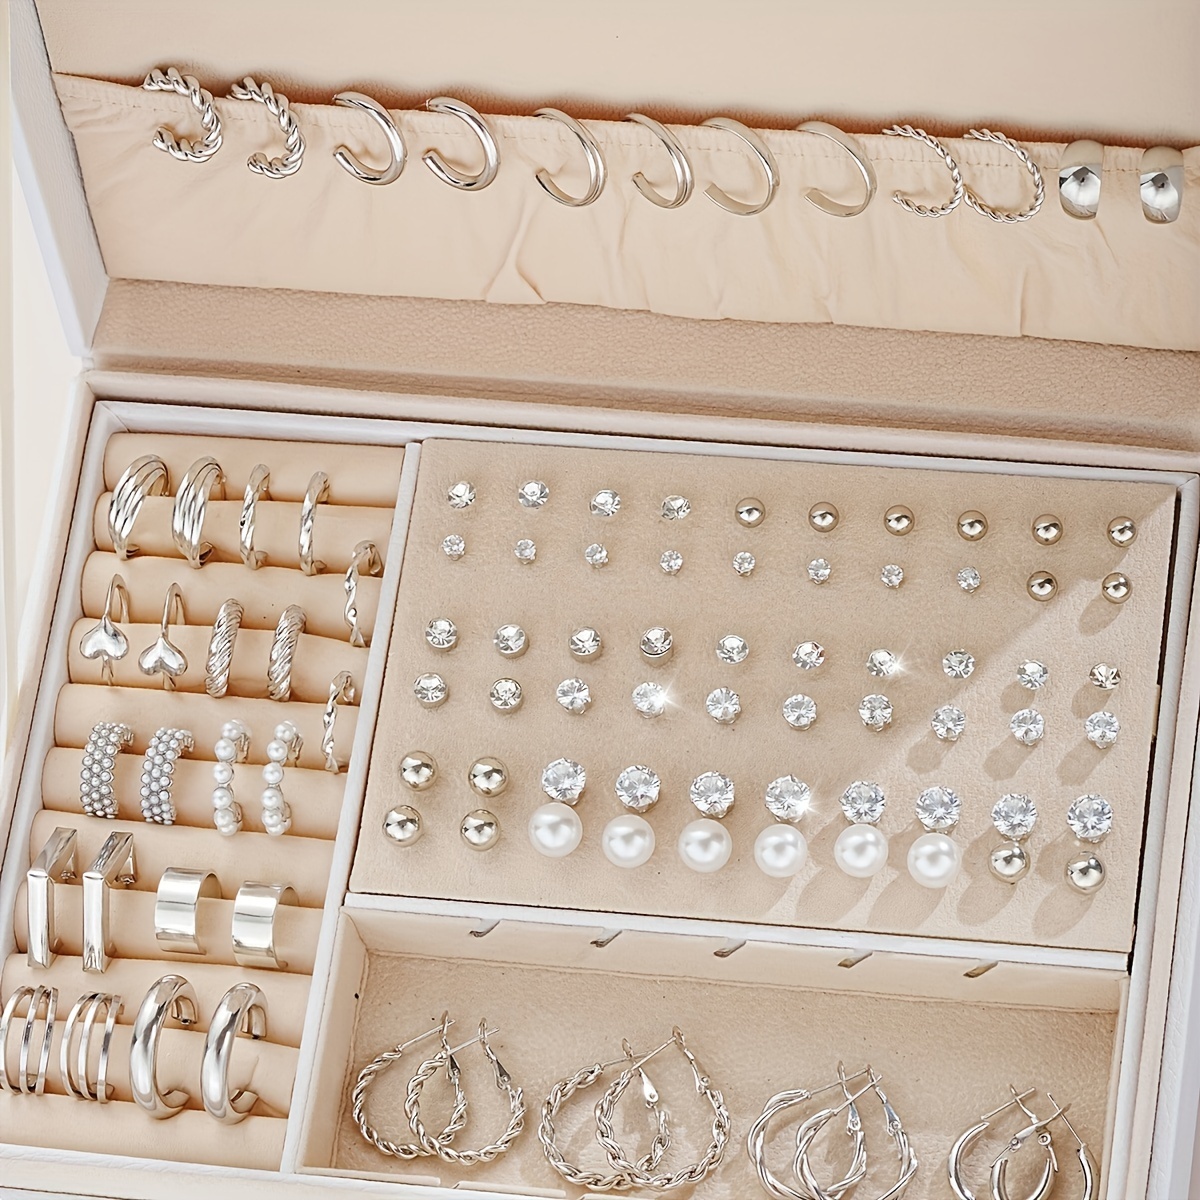 

51-piece Set, Silver Fashion Faux Pearl & Cubic Zirconia Earrings, Lightweight, Ladies' Daily Wear, Versatile, Casual, Gift For Her, Vintage & Bohemian Style, Jewelry Set